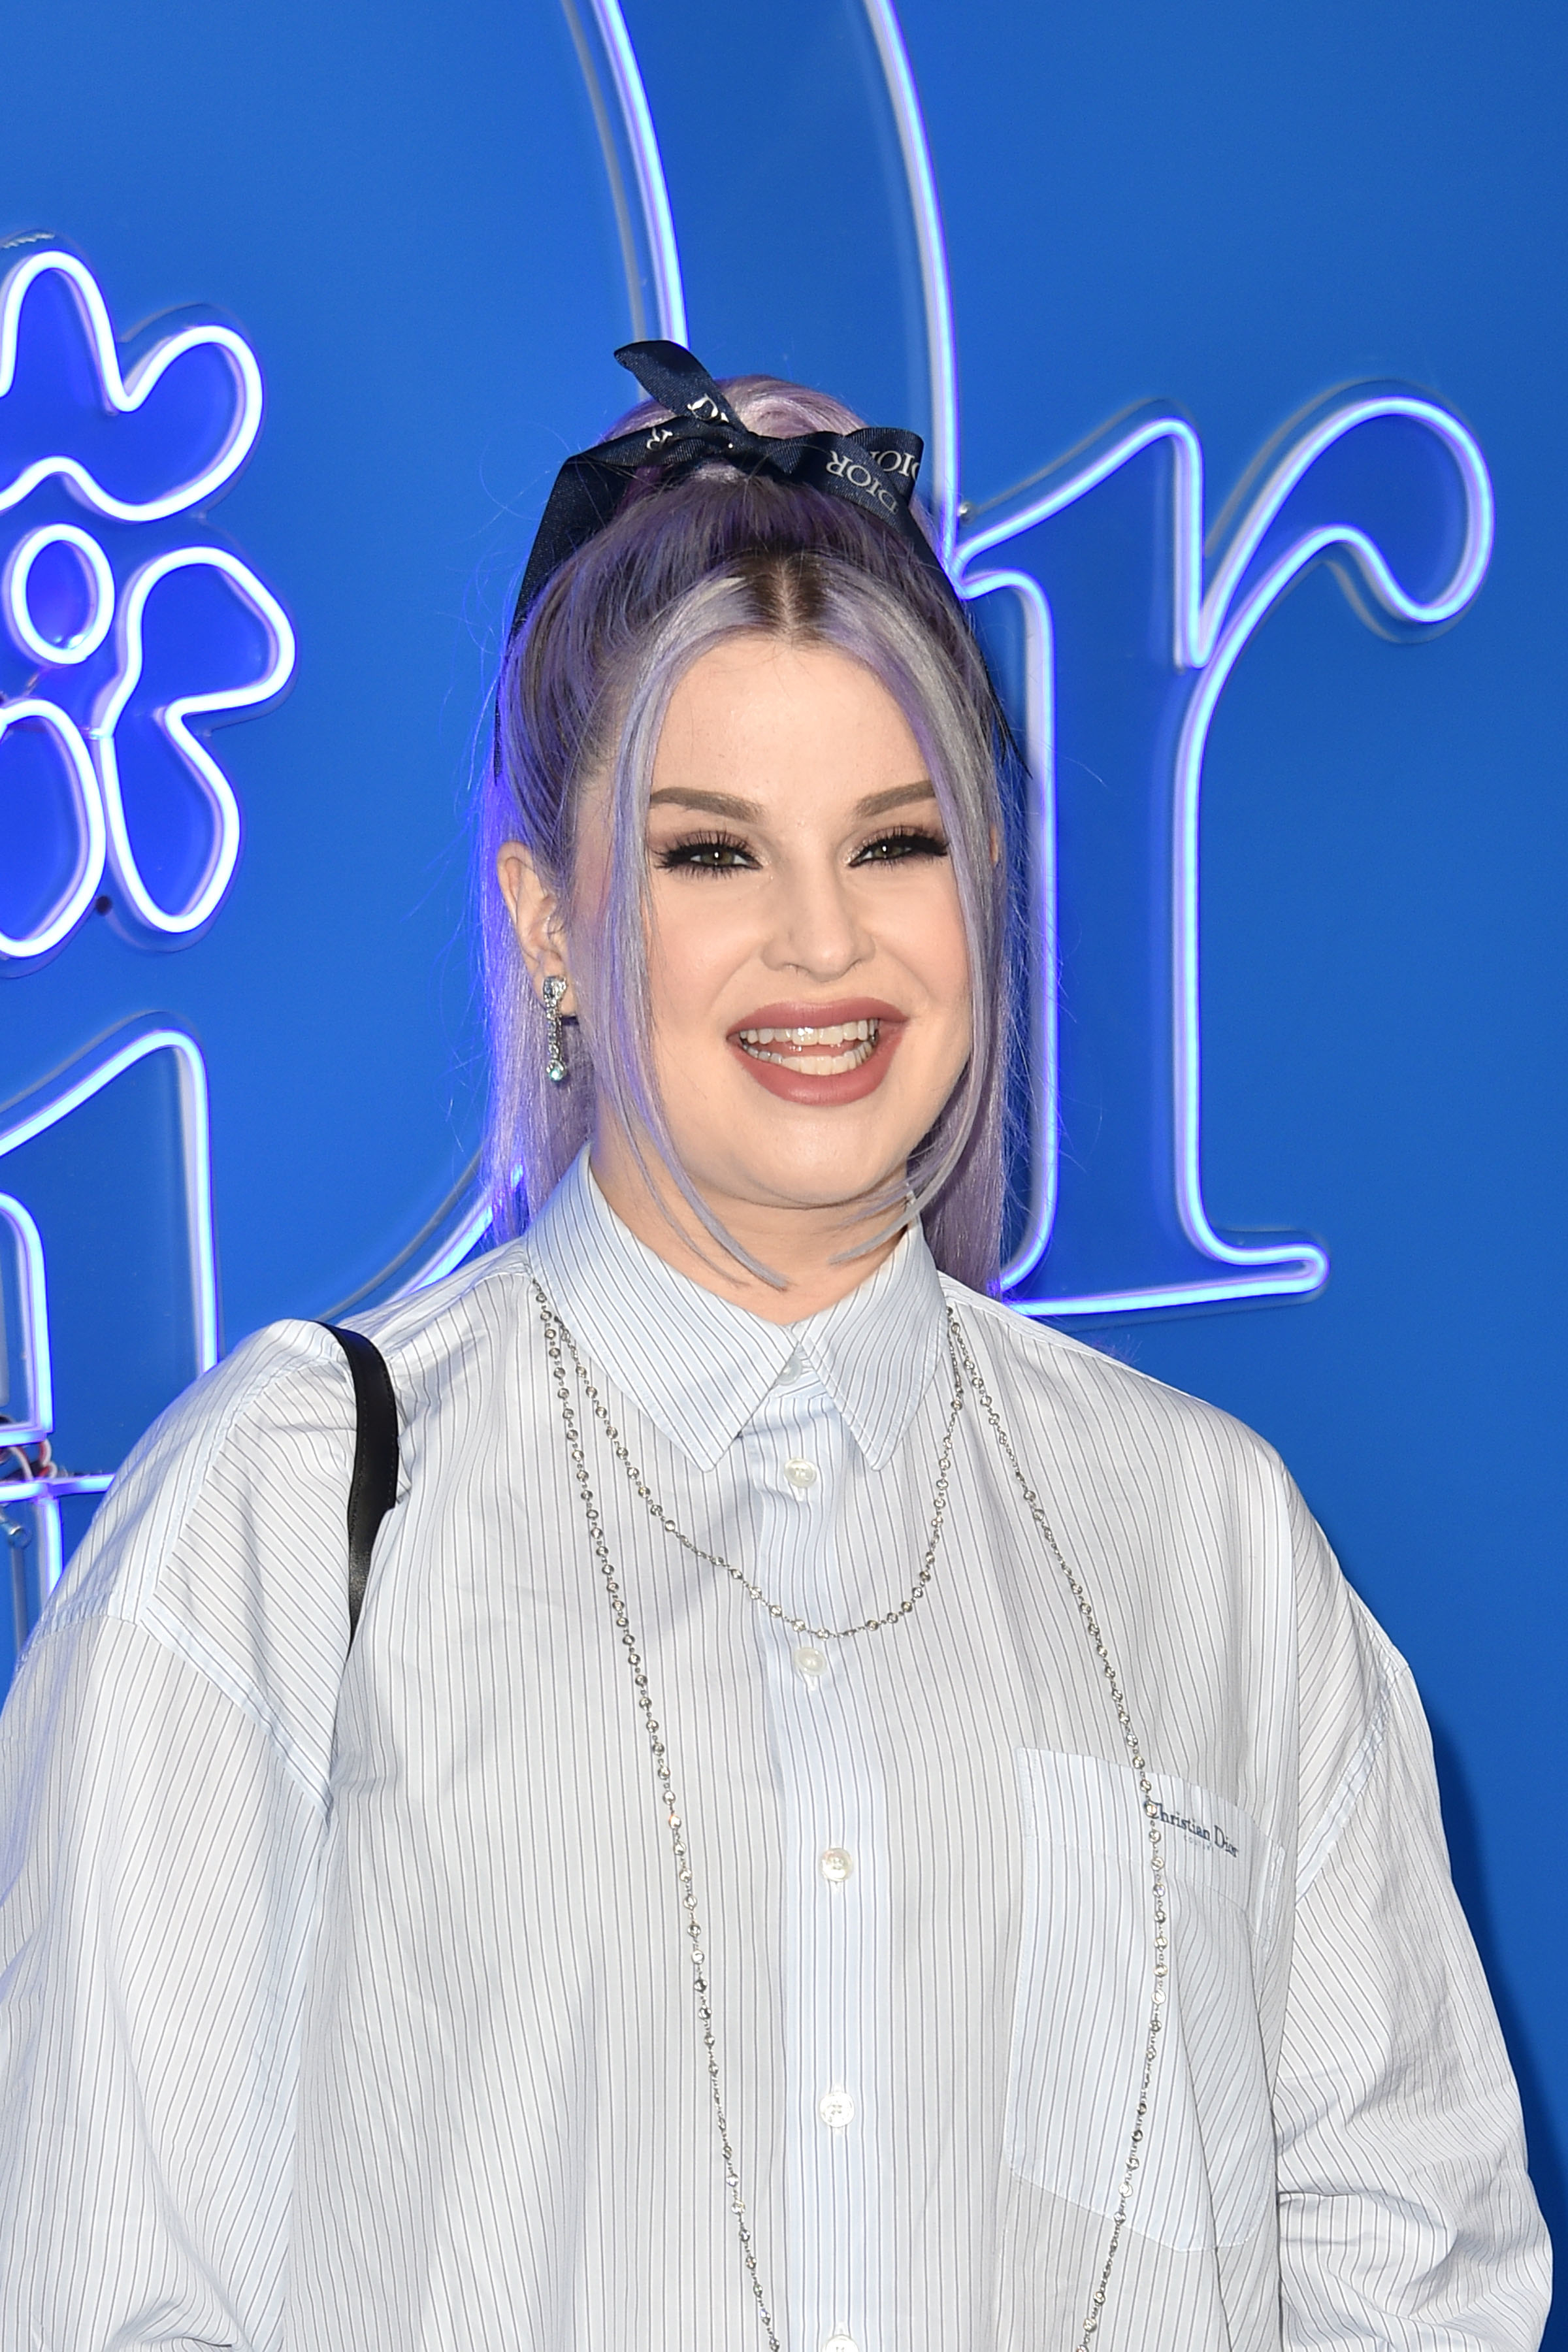 Kelly Osbourne wearing a striped shirt and bow in her hair, smiling at an event with a neon backdrop